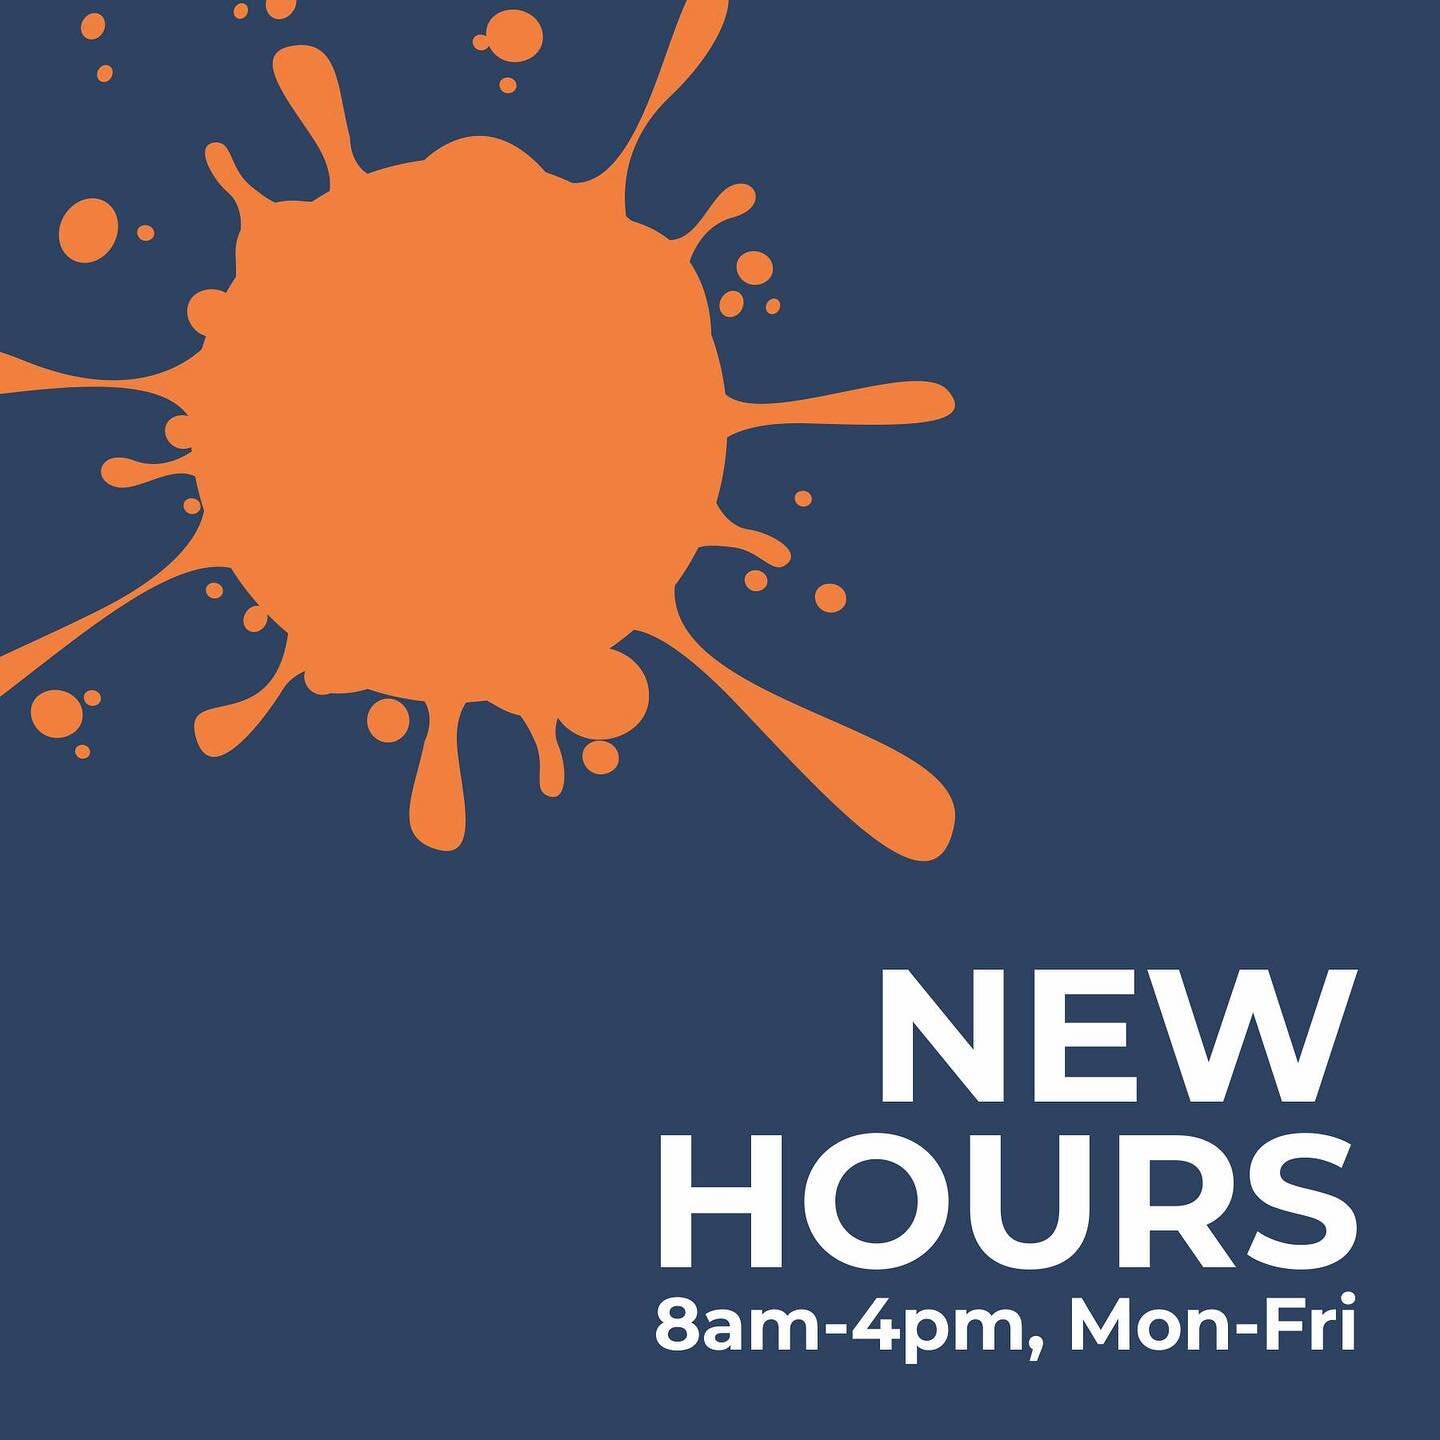 It's time to increase our hours again! We're now open 8am - 4pm, Monday - Friday. Thank you for your continued
support, we wouldn't be here without YOU!

#oceanshoreprinting
#inkedatoceanshore
#updatedhours
#grateful
#sogoodtobebusyagain
#cov